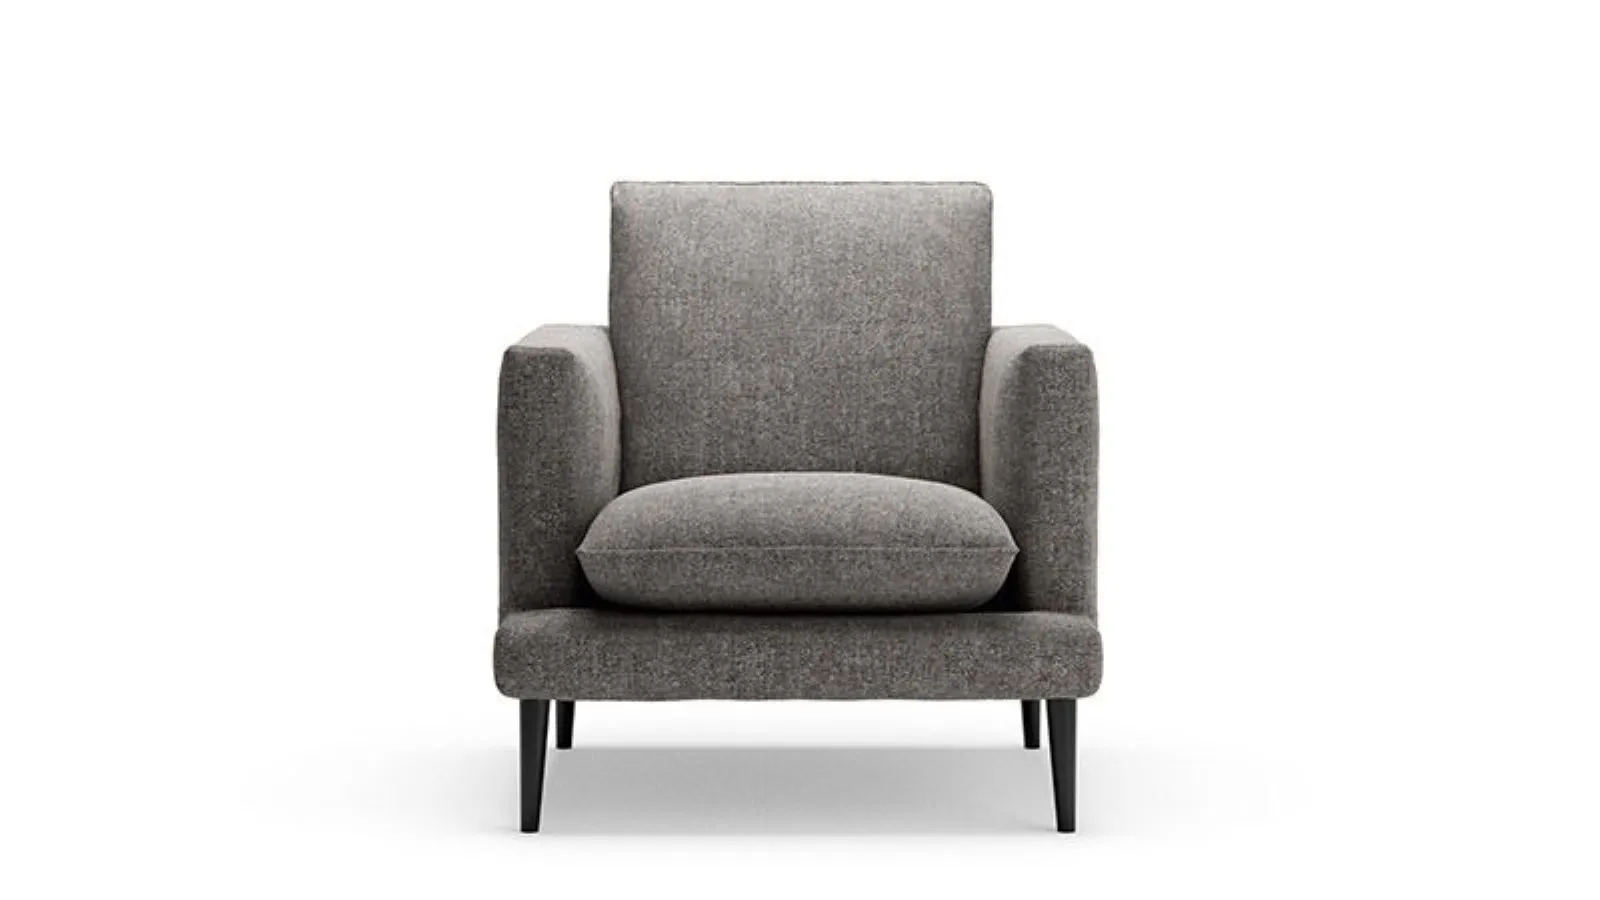 soft and comfortable armchair